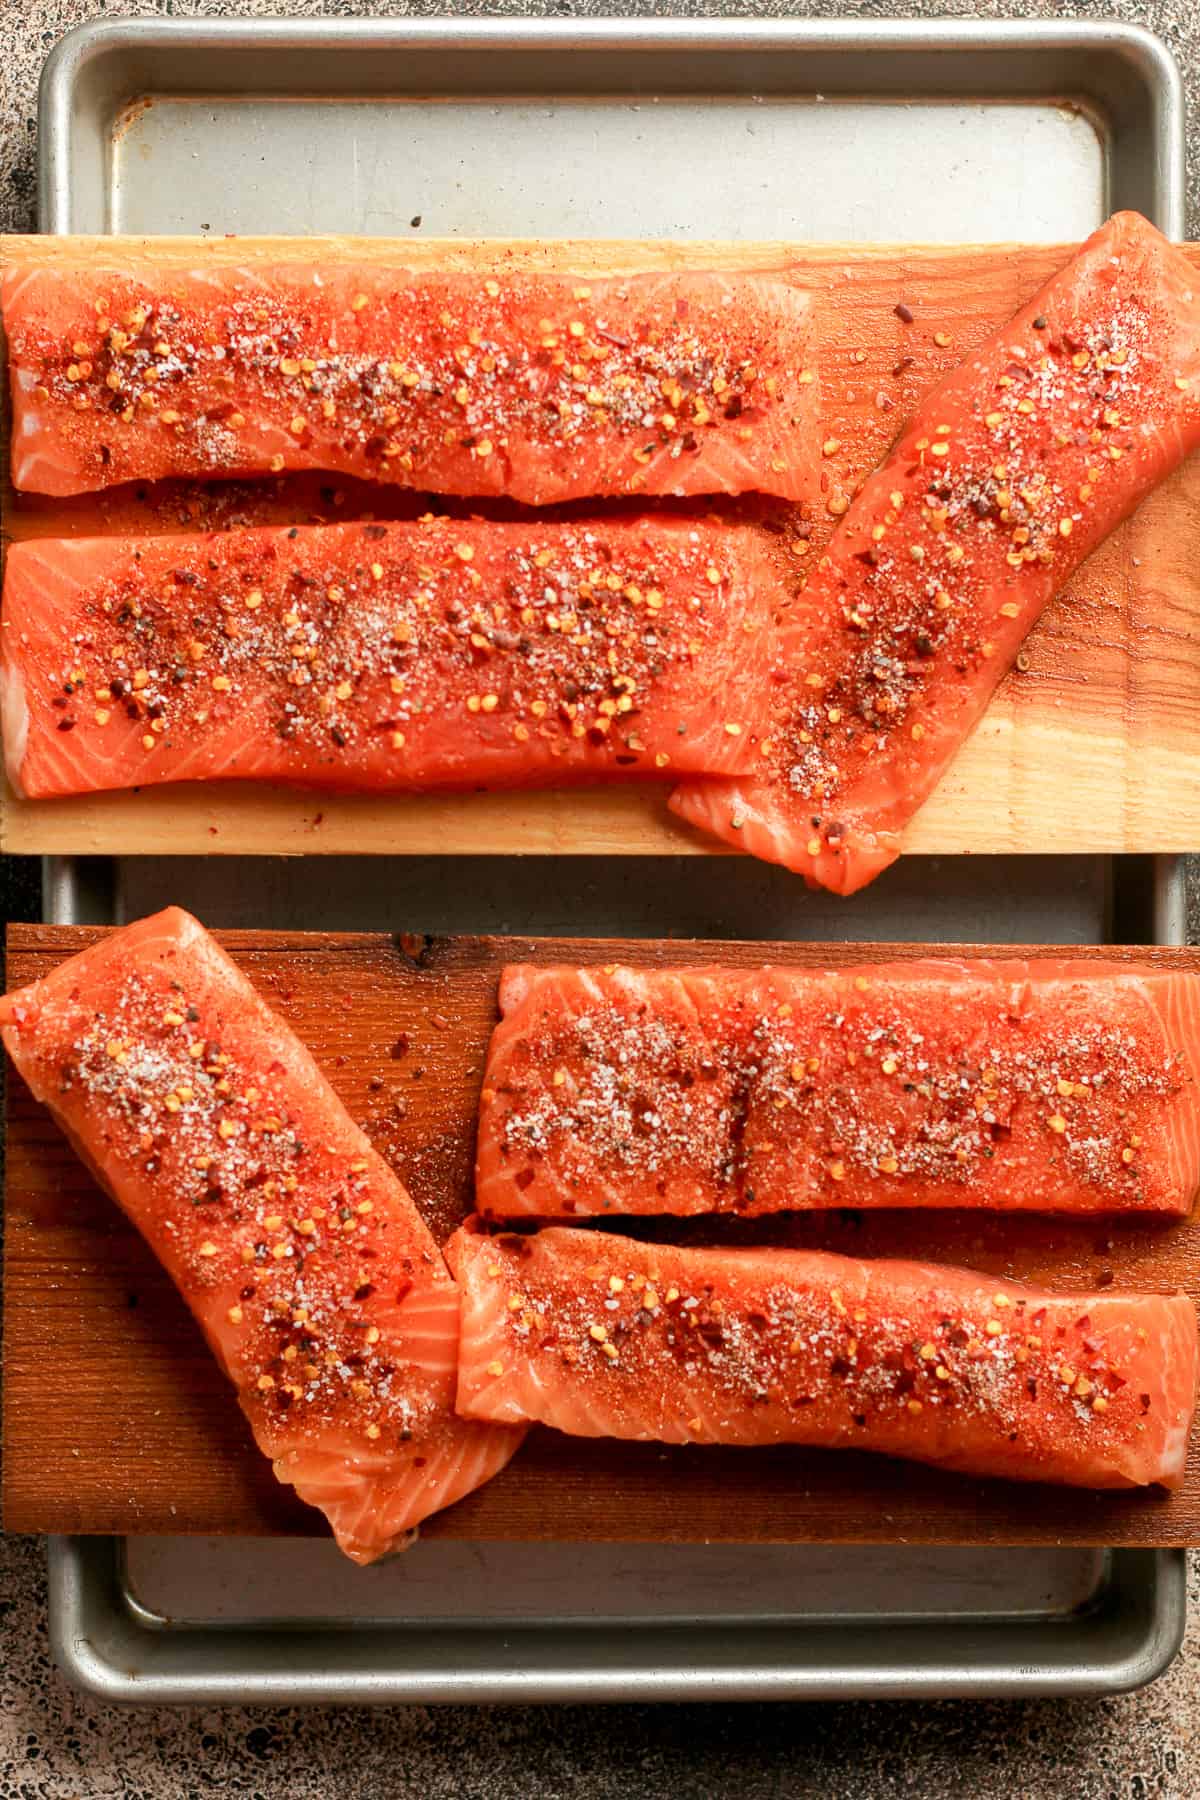 The pan with the raw salmon with seasoning on two planks.